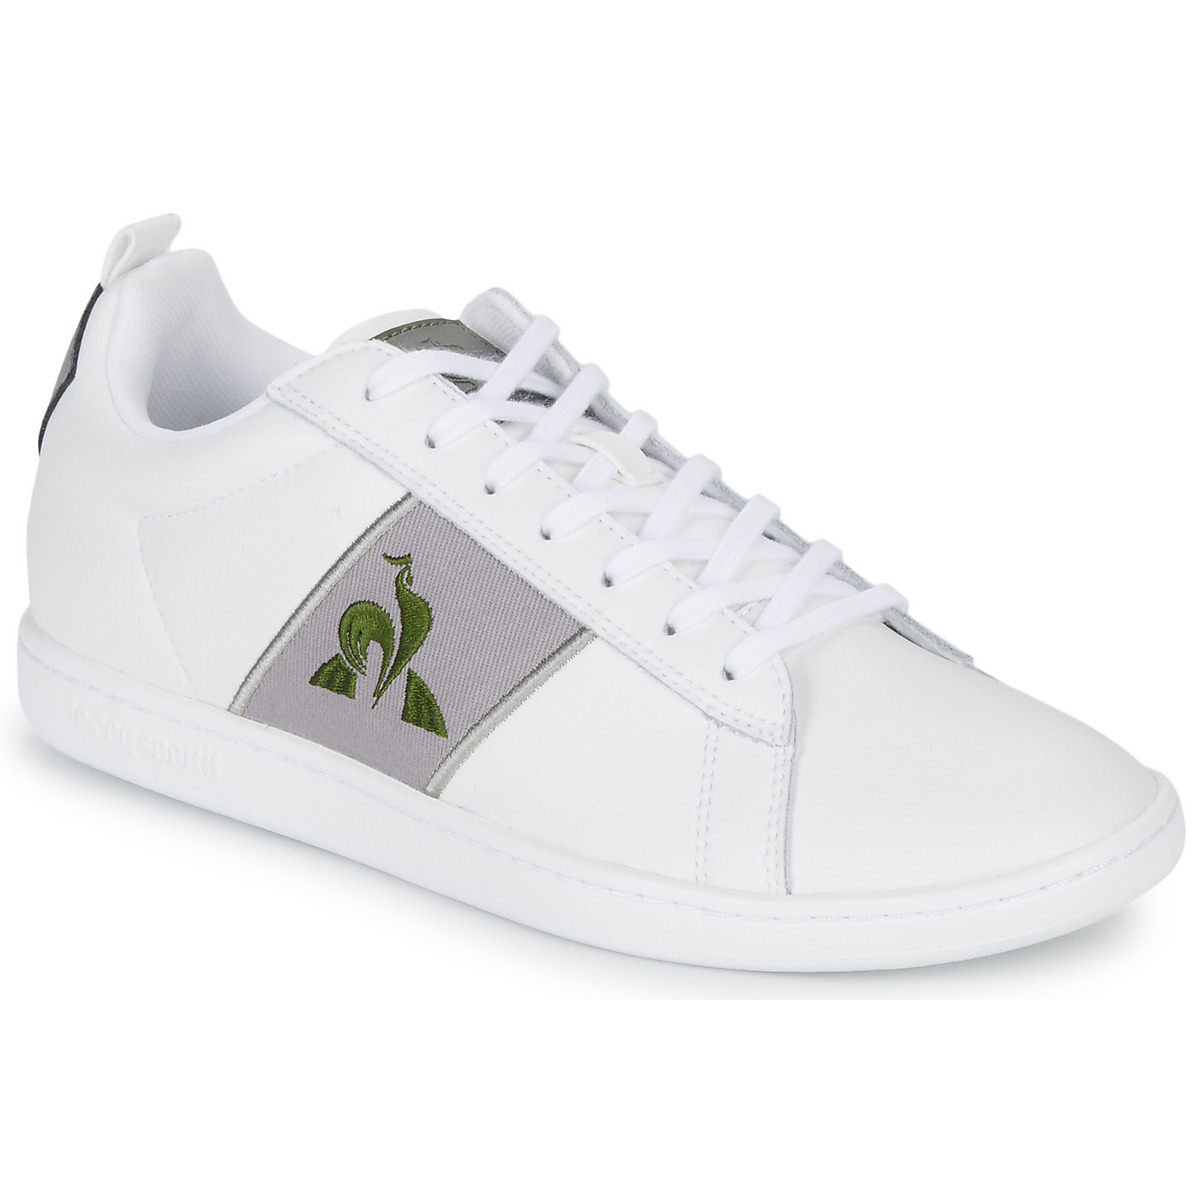 Le Coq Sportif Gris COURTCLASSIC TWILL OmSbKxKP